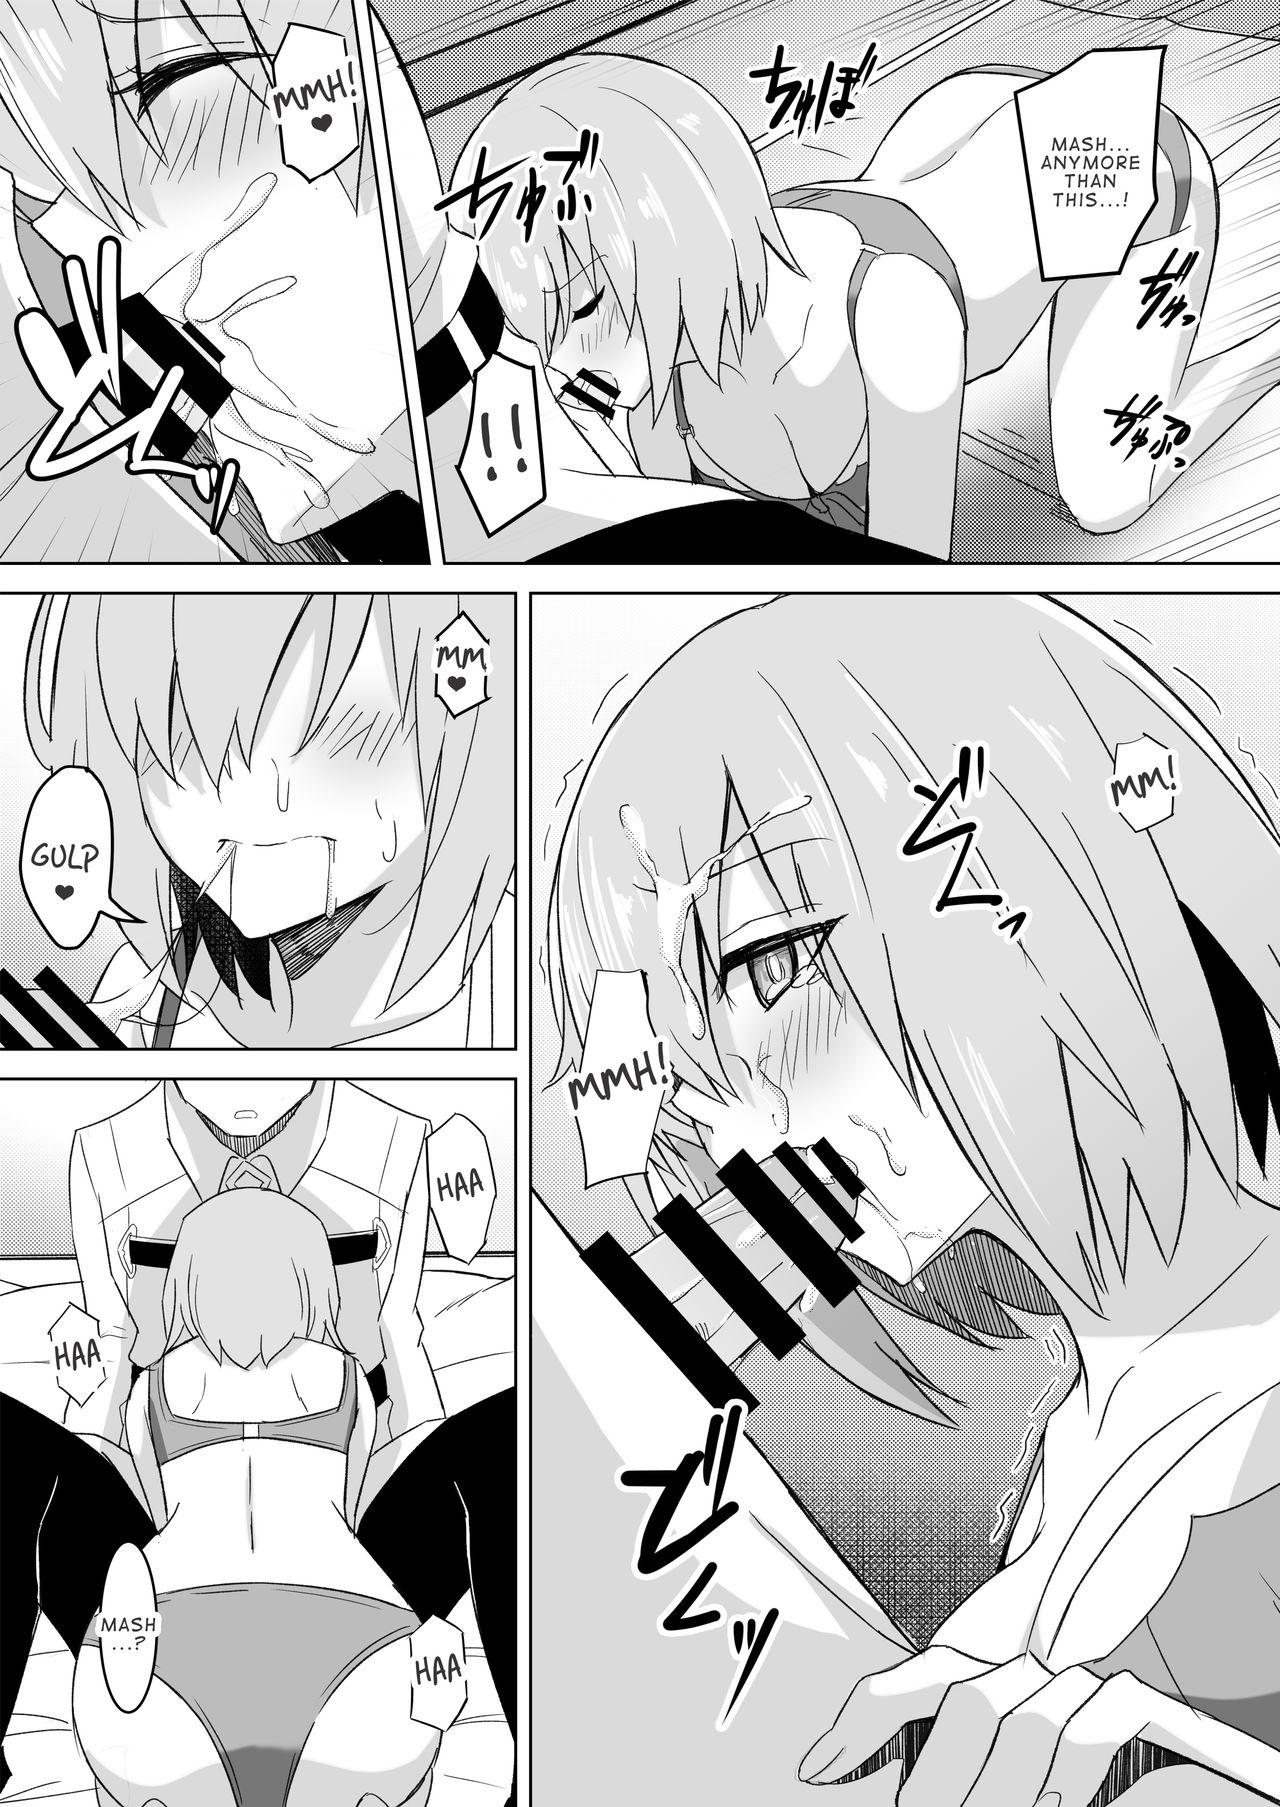 Gay Masturbation Mash Was Jealousy - Fate grand order Wives - Page 8